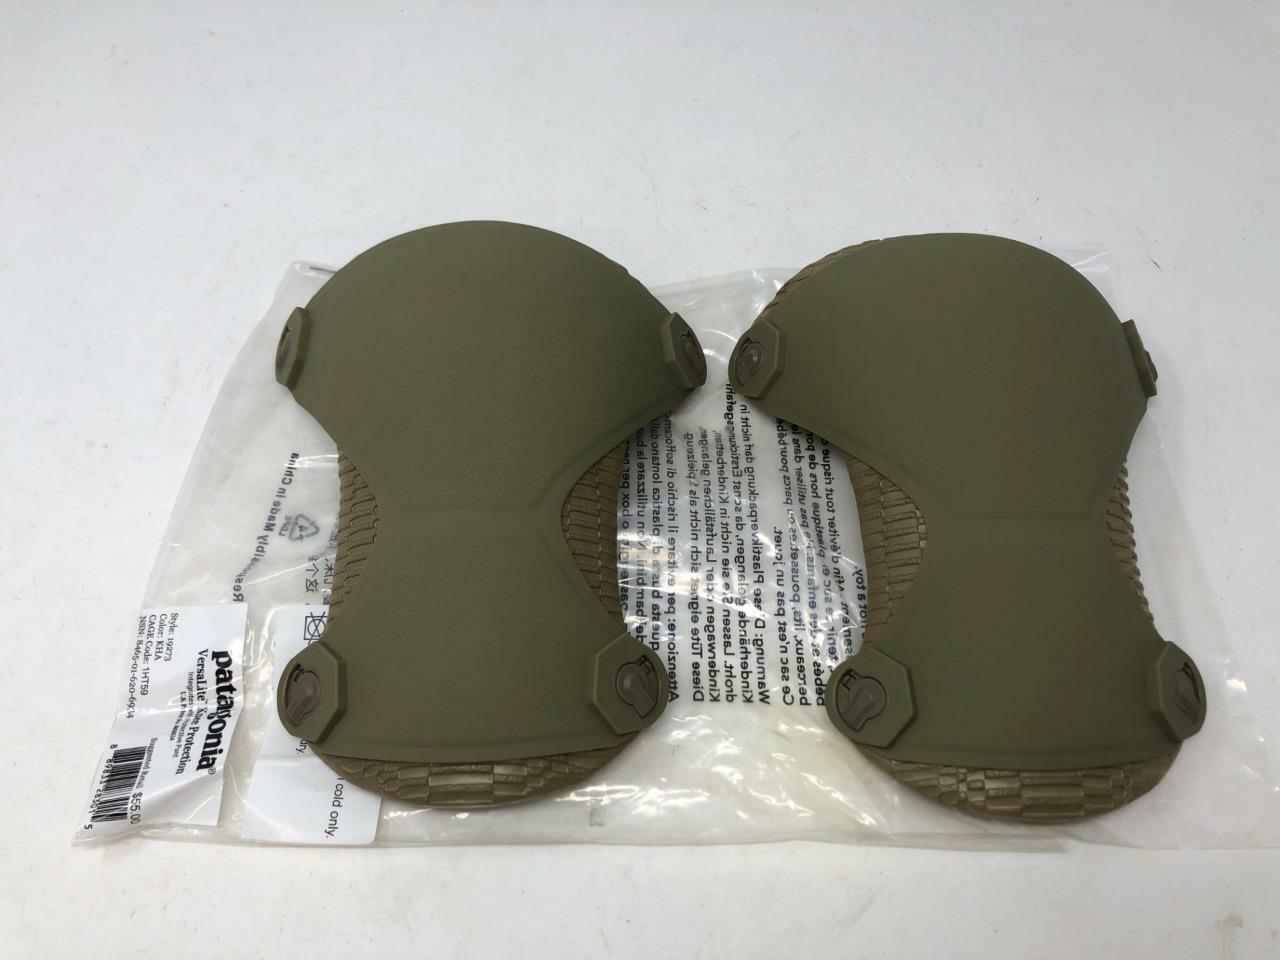 PATAGONIA VIKP VERSALITE INTEGRATED KNEE PROTECTION PADS LEVEL 9 NEW SOCOM L9